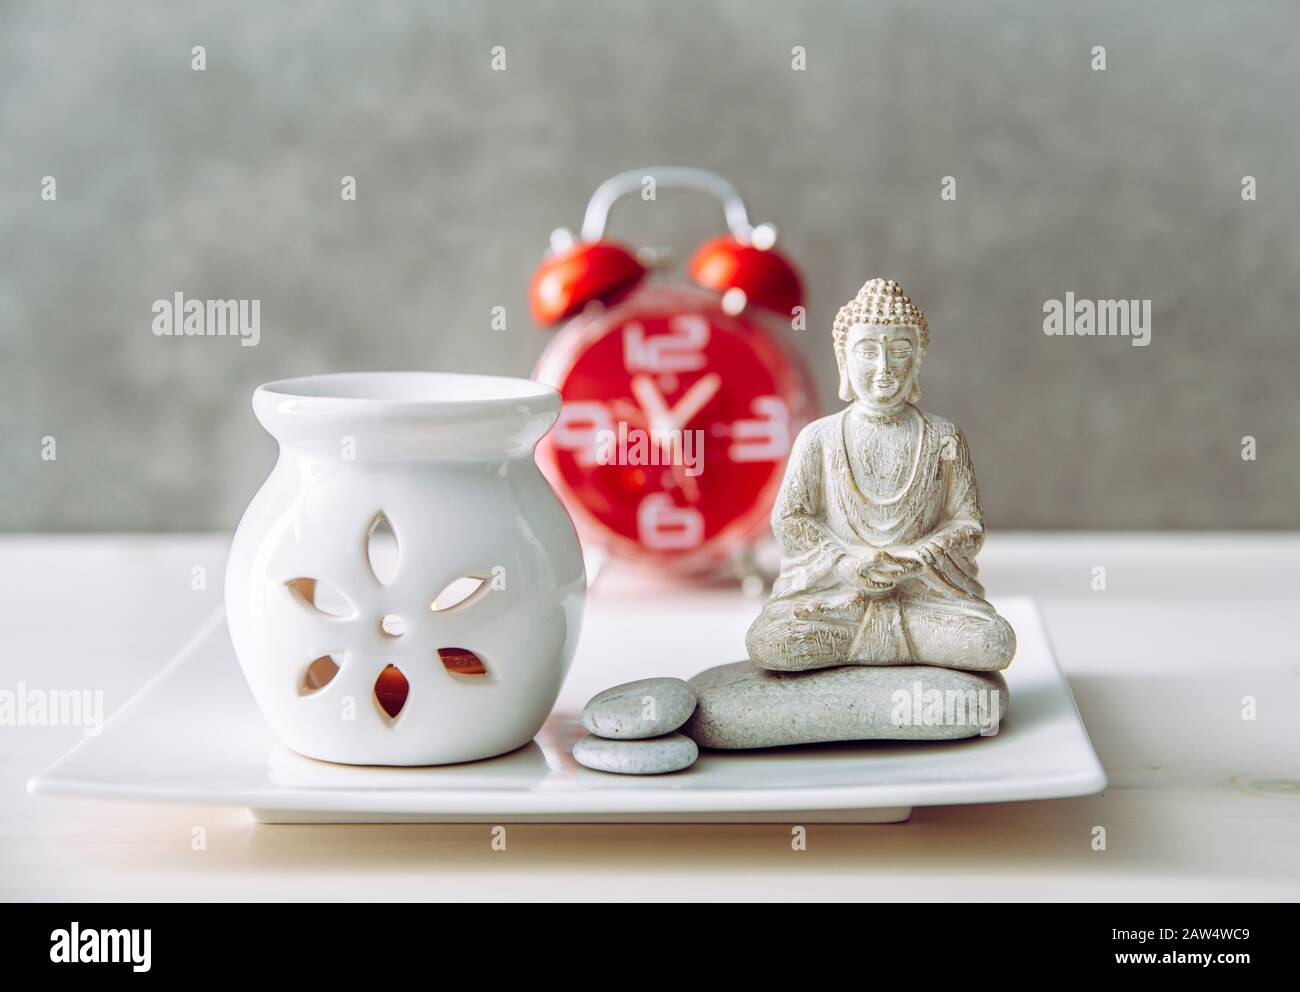 How to find balance between busy life and healthy mental health. Taking a break to sit and meditate concept. Buddha figure with aroma lamp and clock o Stock Photo